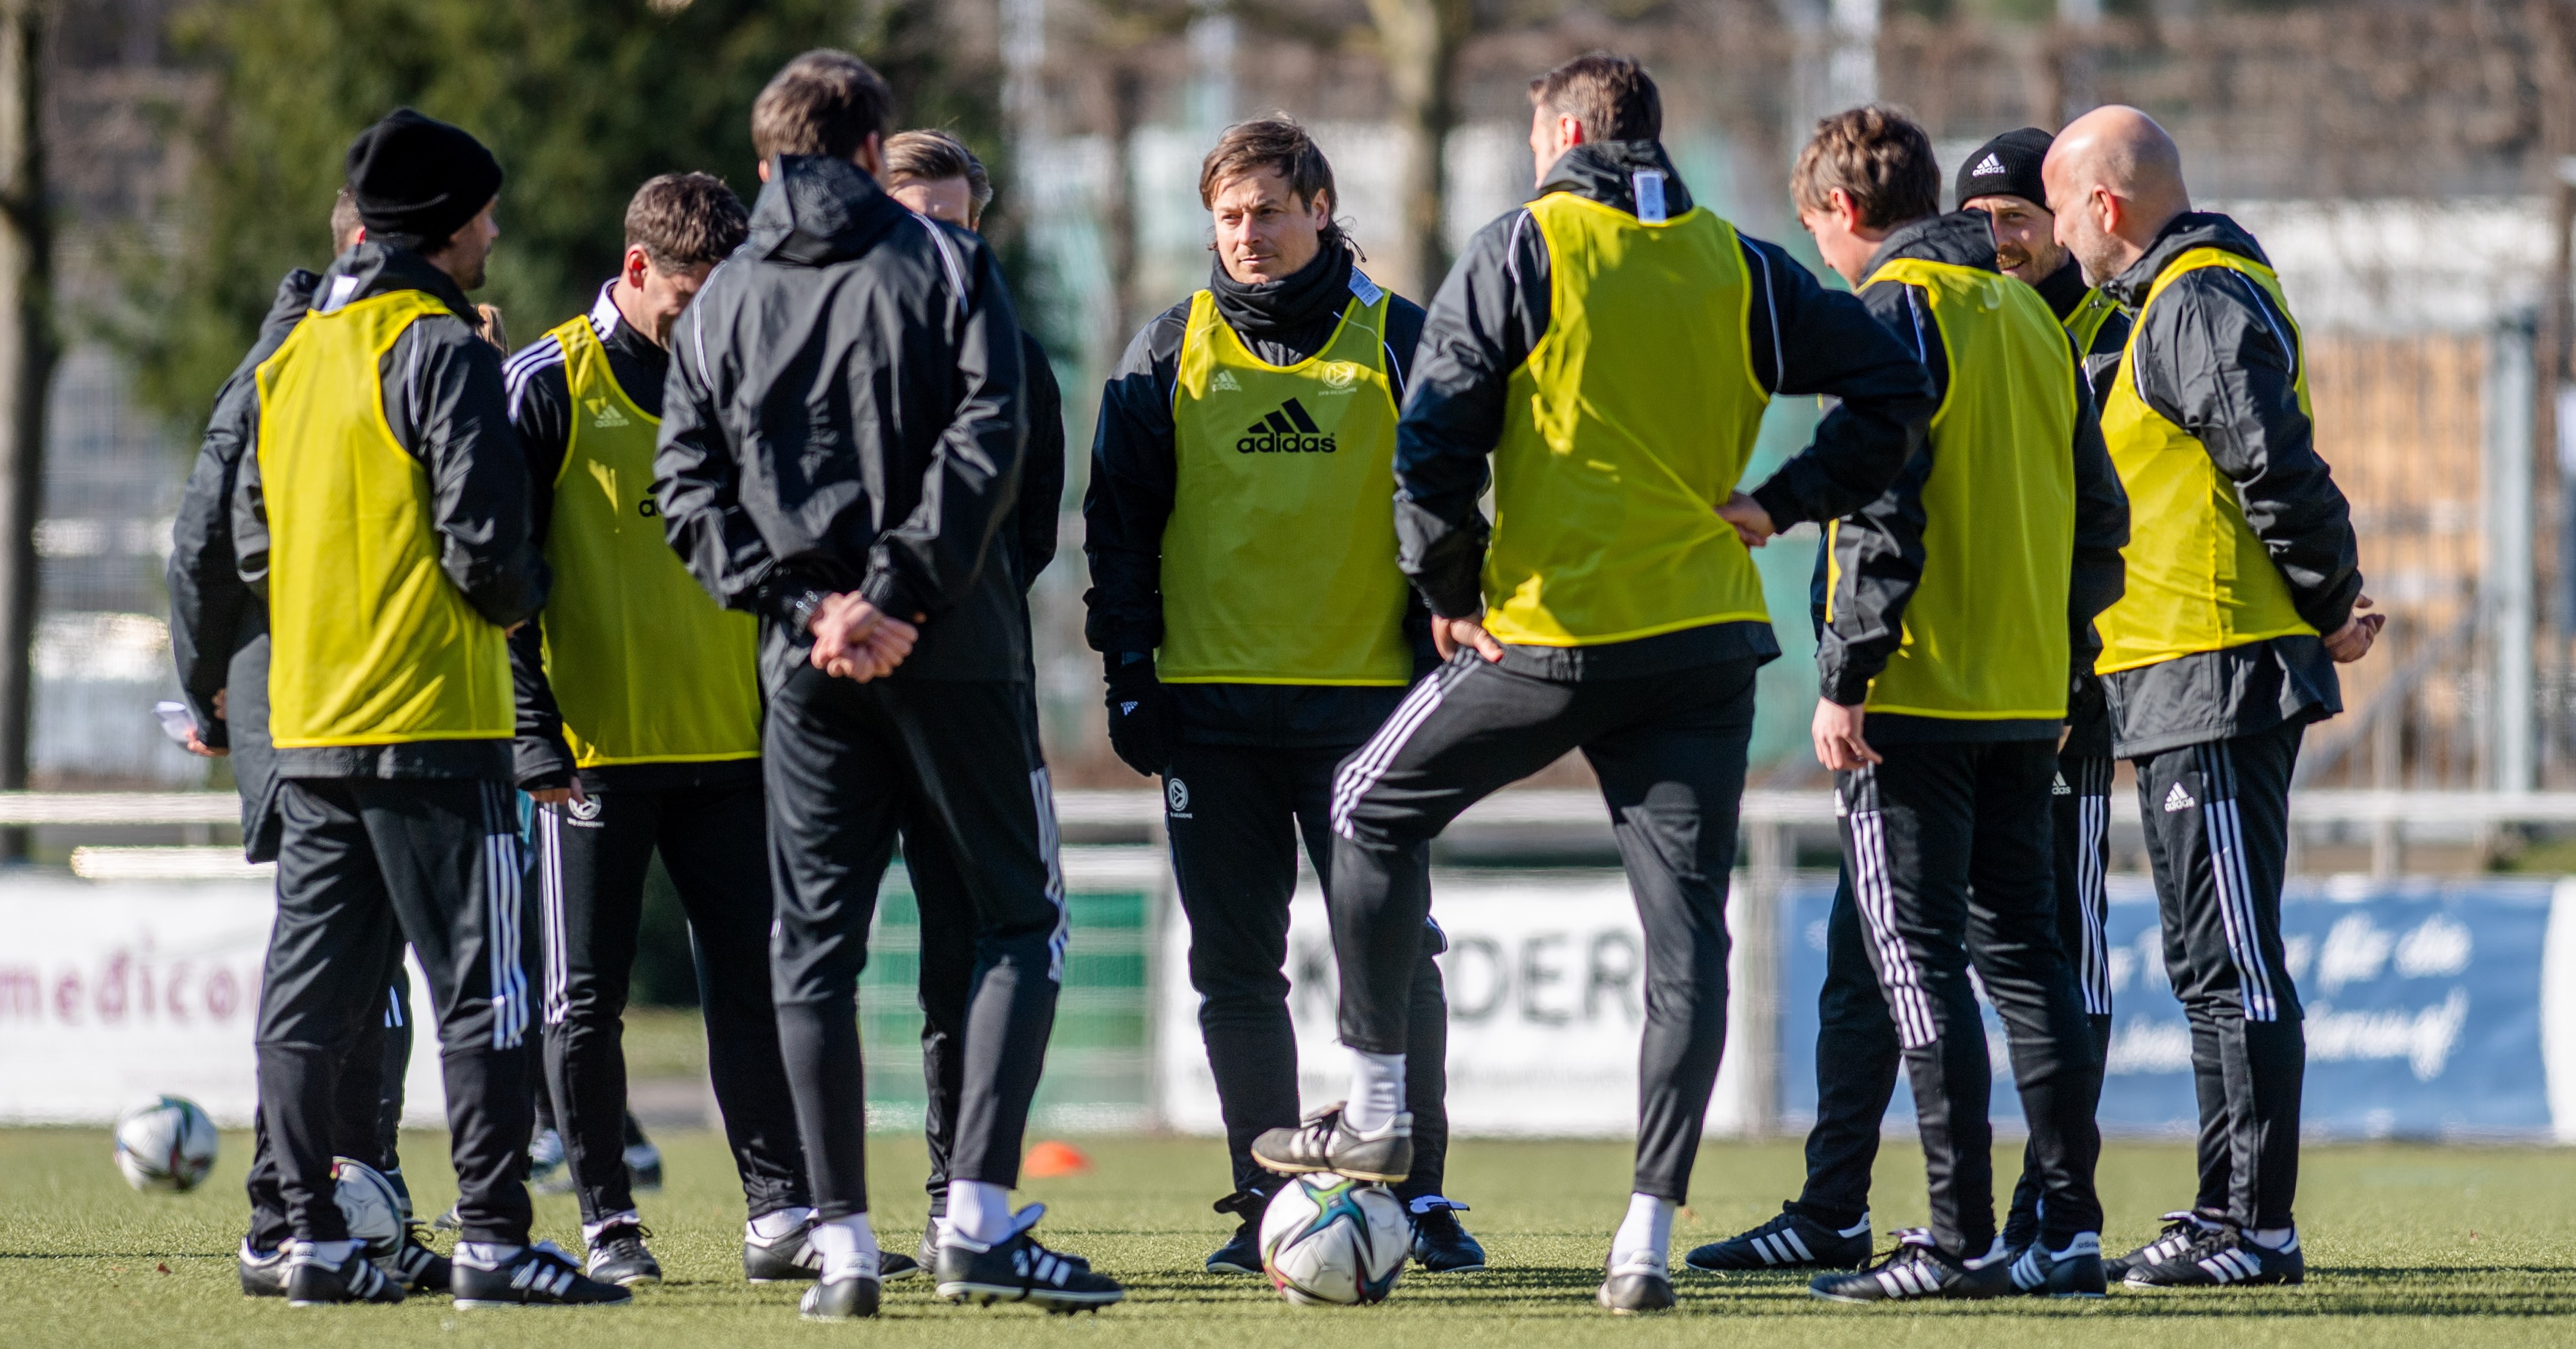 COLOGNE, GERMANY - MARCH 07: Participants during a Pro Licence Coaching Course at the Rhein Energy Stadium on March 7, 2022 in Cologne, Germany. (Photo by Neil Baynes/Getty Images for DFB)